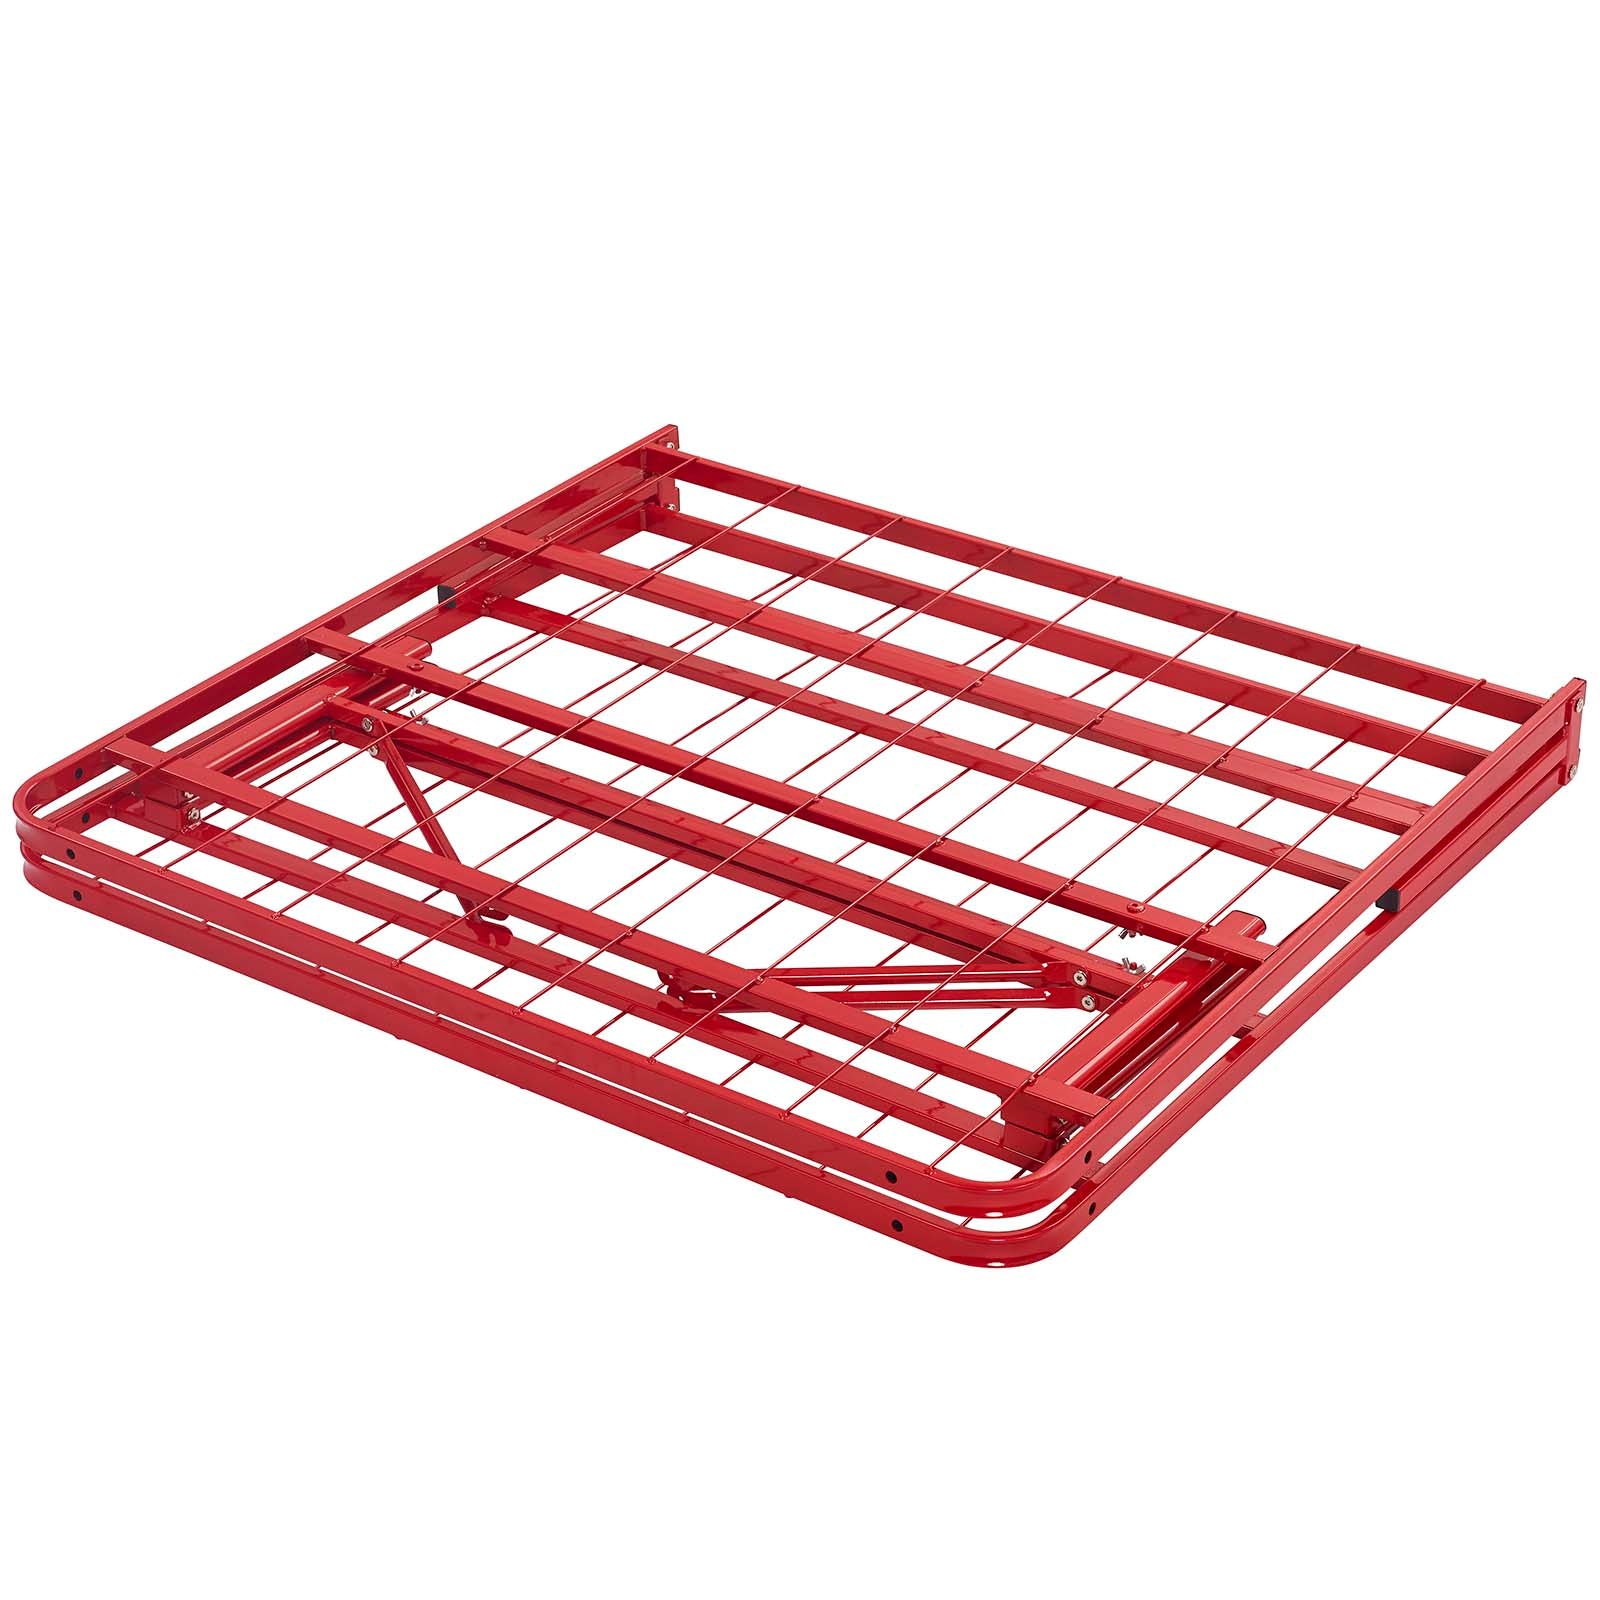 Modway Beds - Horizon Twin Stainless Steel Bed Frame Red